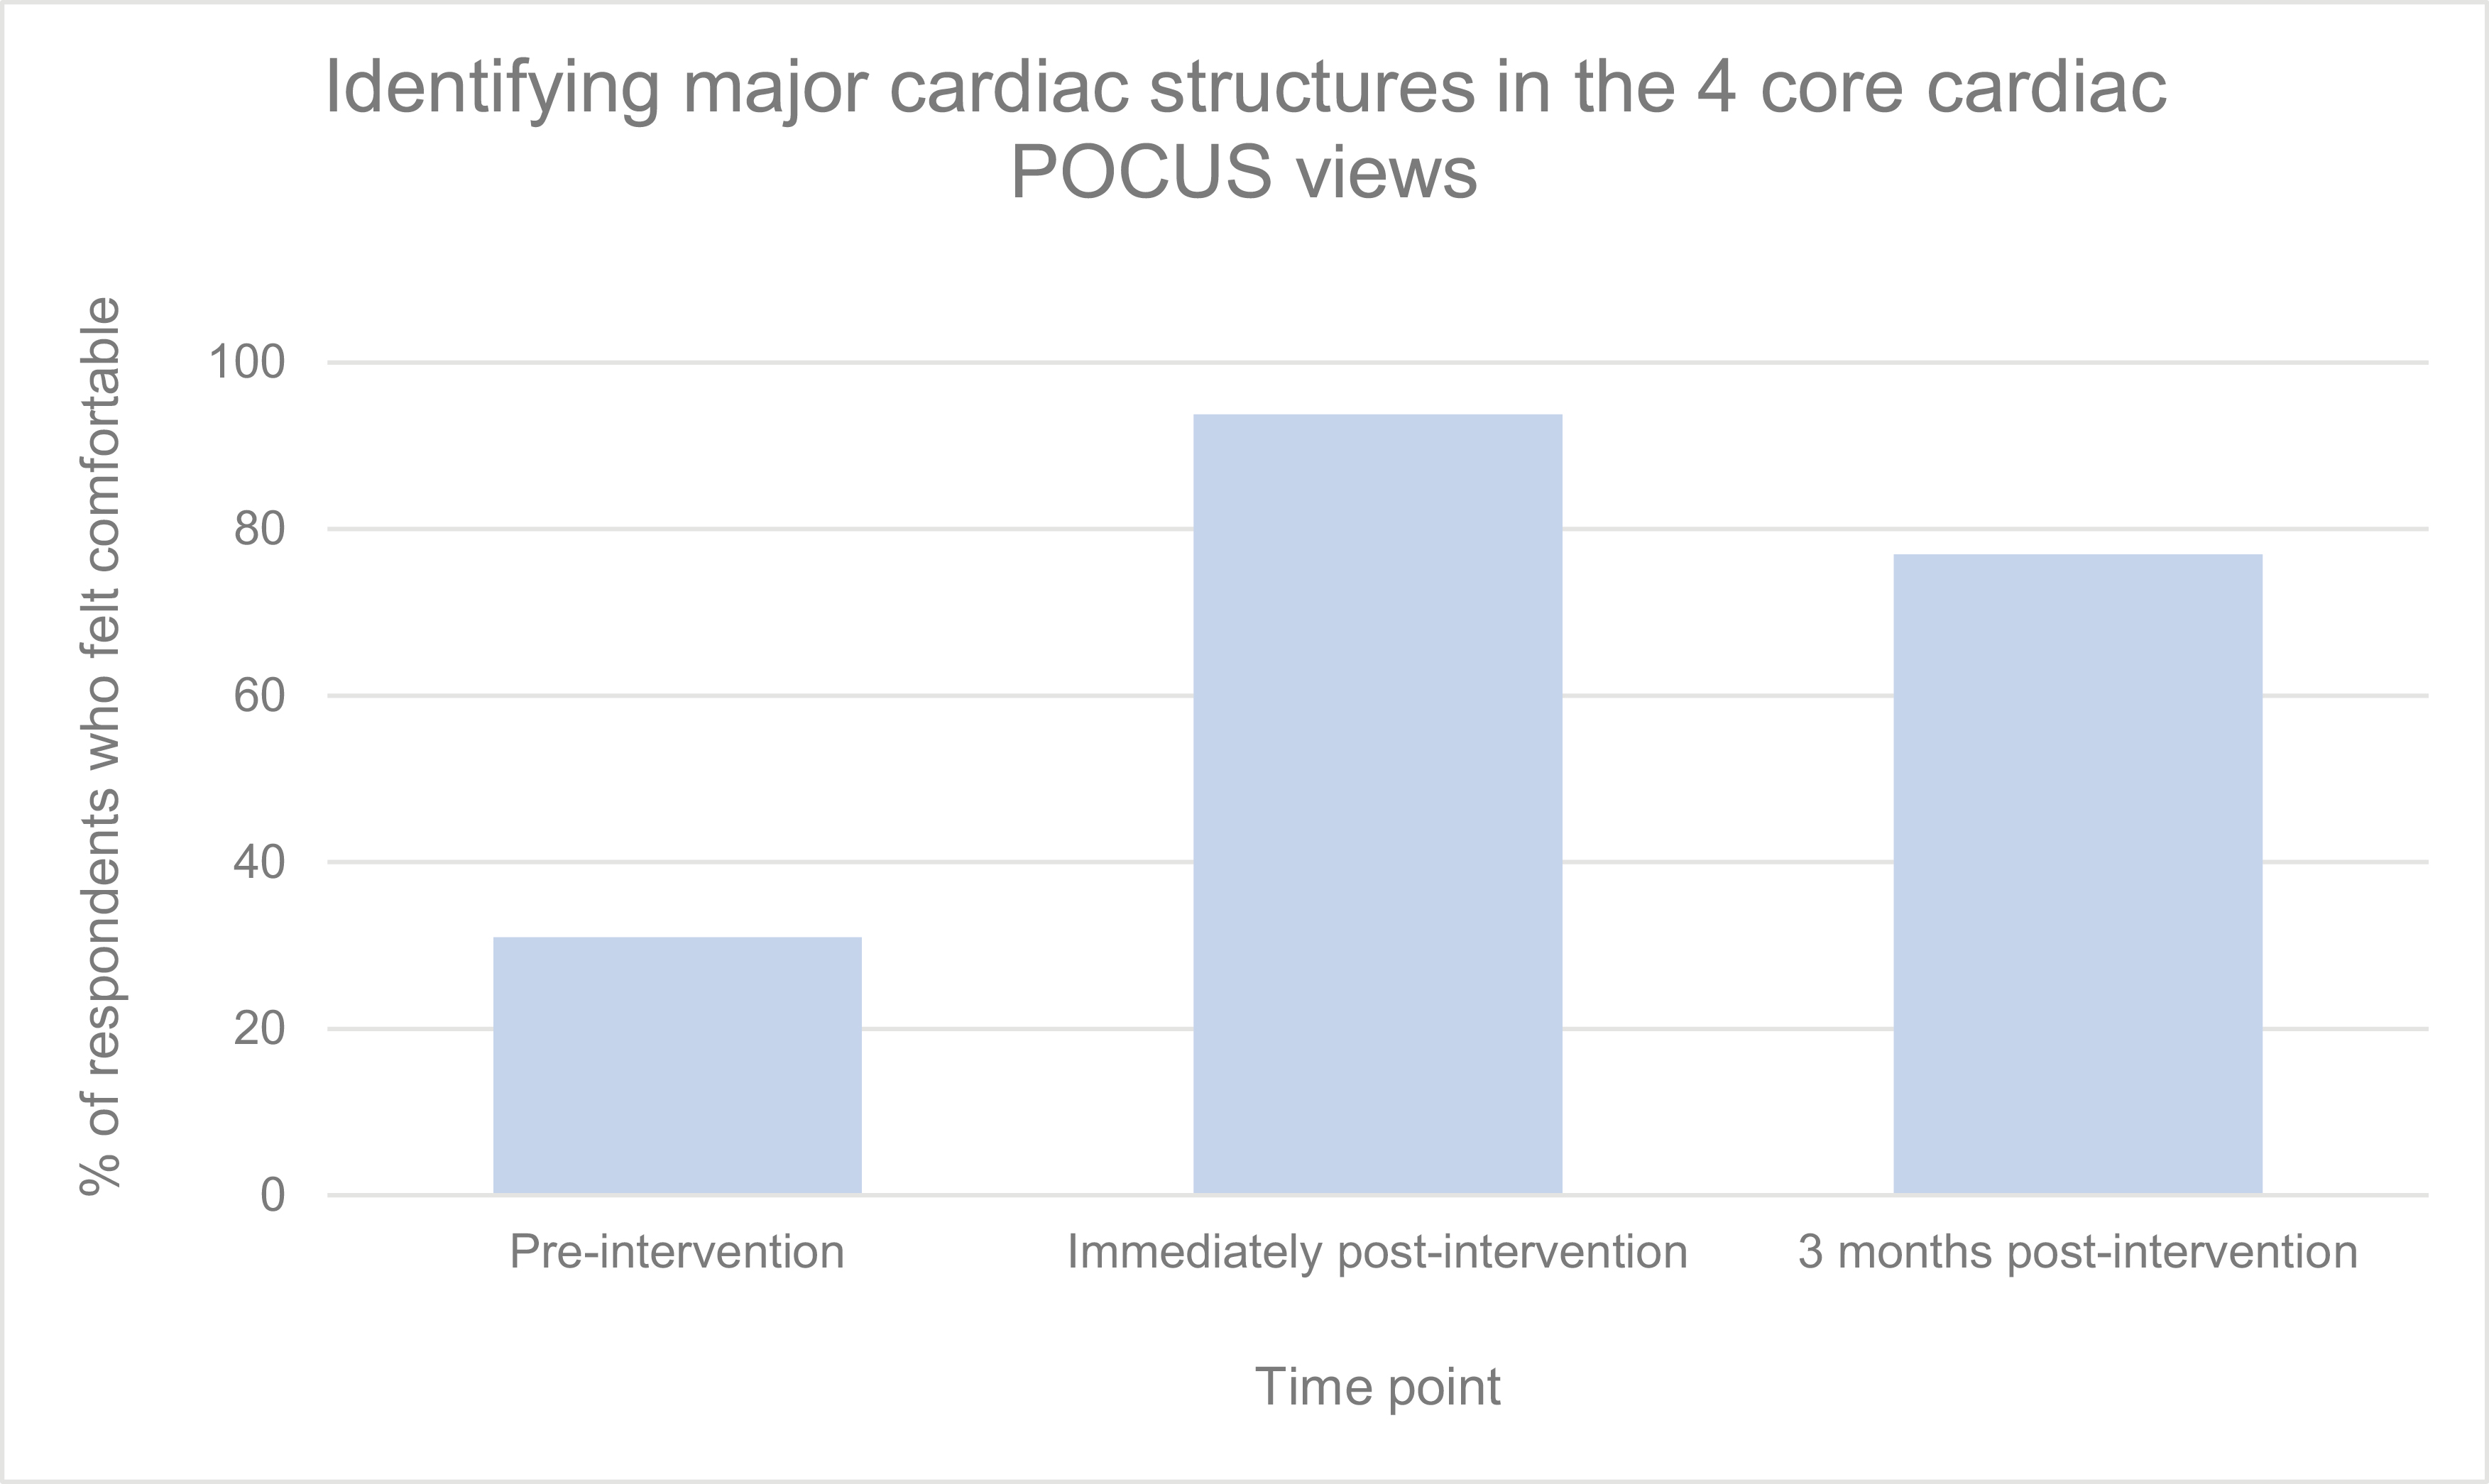 Percentage of respondents who felt comfortable identifying major cardiac structures in the four core cardiac POCUS views at each time point